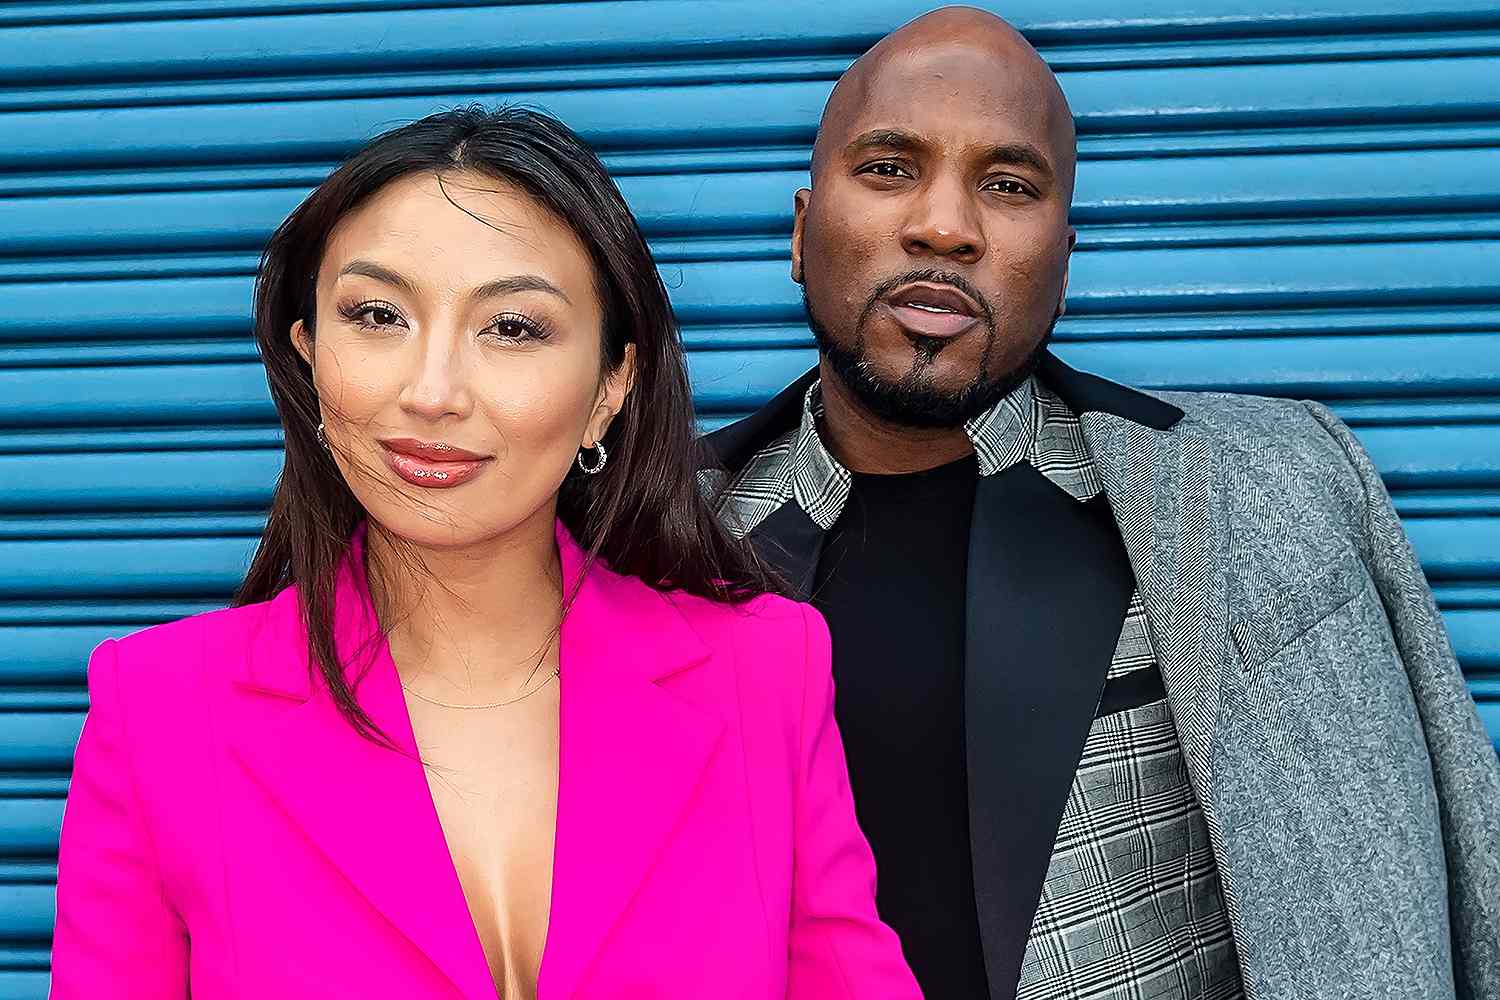 Read The Divorce Papers Jeezy Slapped Jeannie Mai With Demanding Joint Custody After Breakup